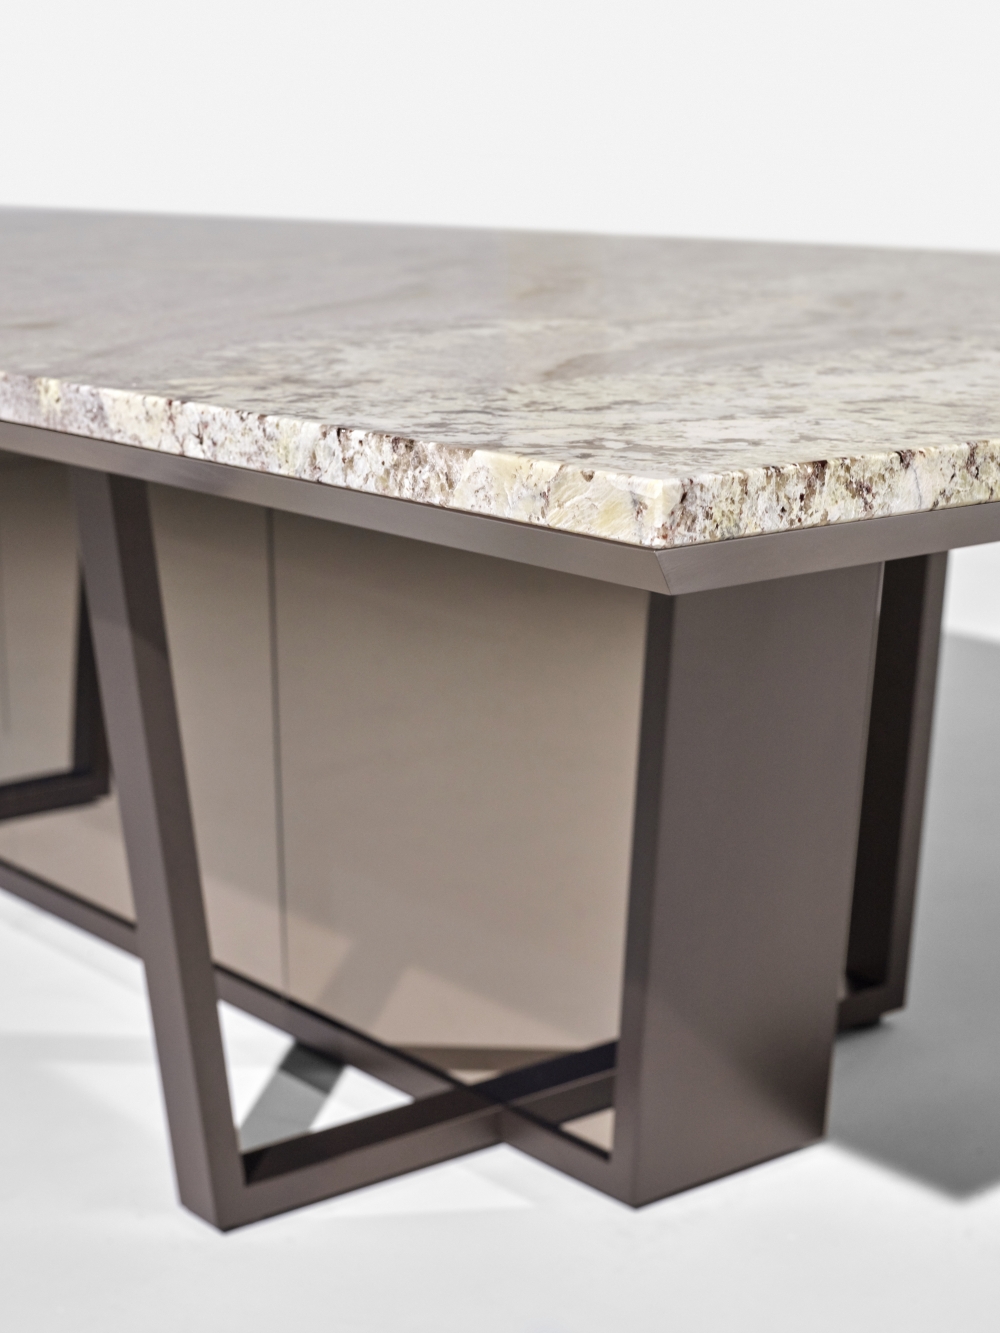 Preview of Crossbeam | Conference Table | COM Stone | Aged Bronze Base | Bronze Mirrored Acrylic | Side View Detail